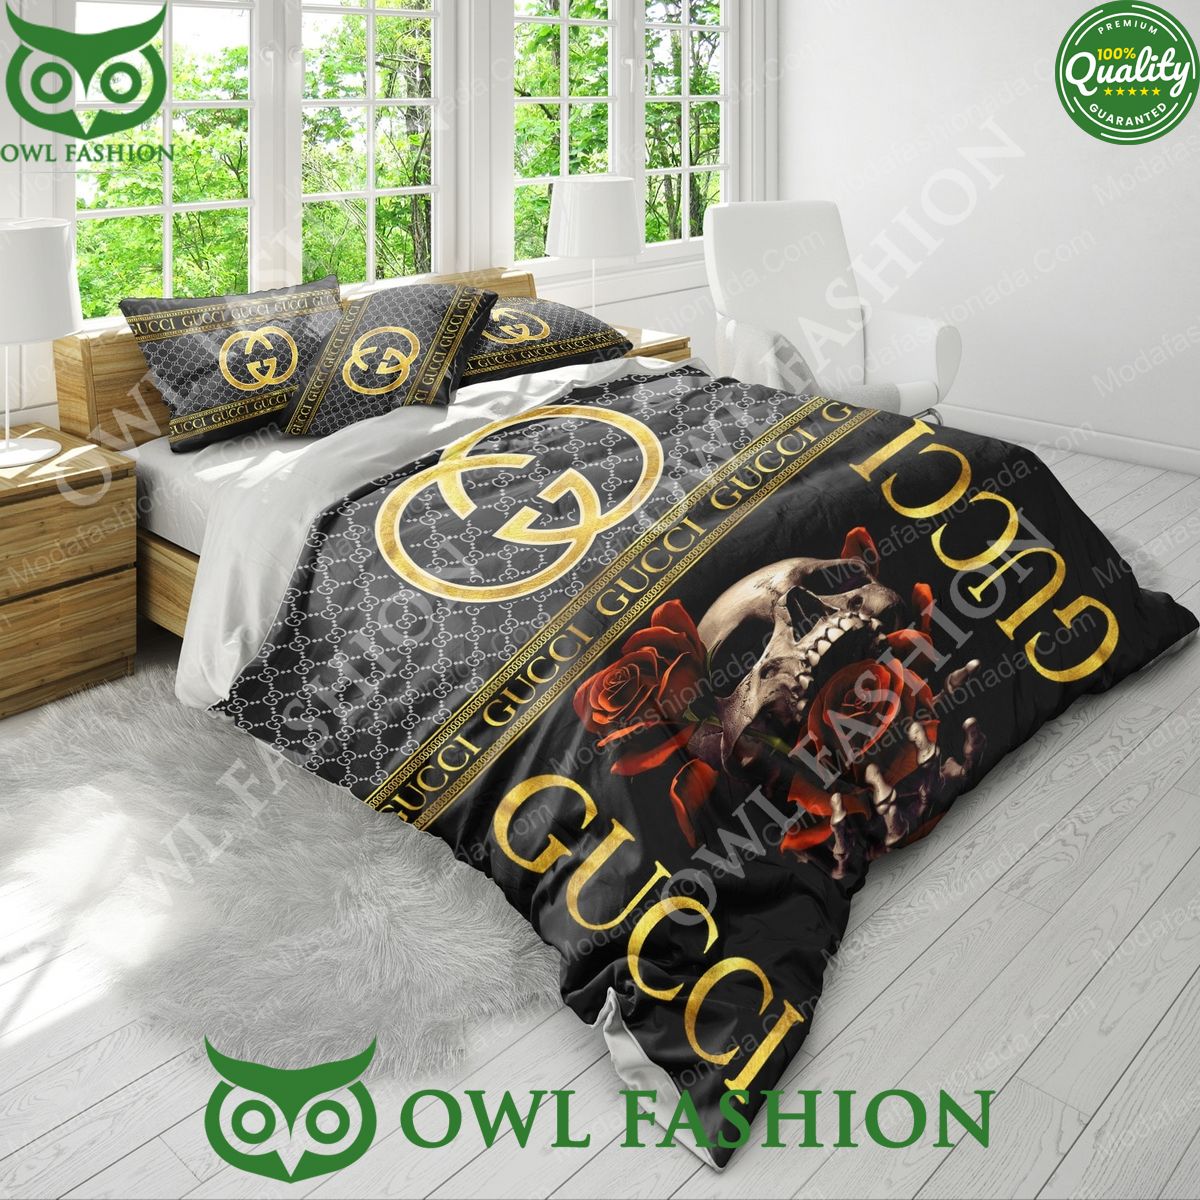 Gucci Skull And Roses Bedding Sets - Owl Fashion Shop